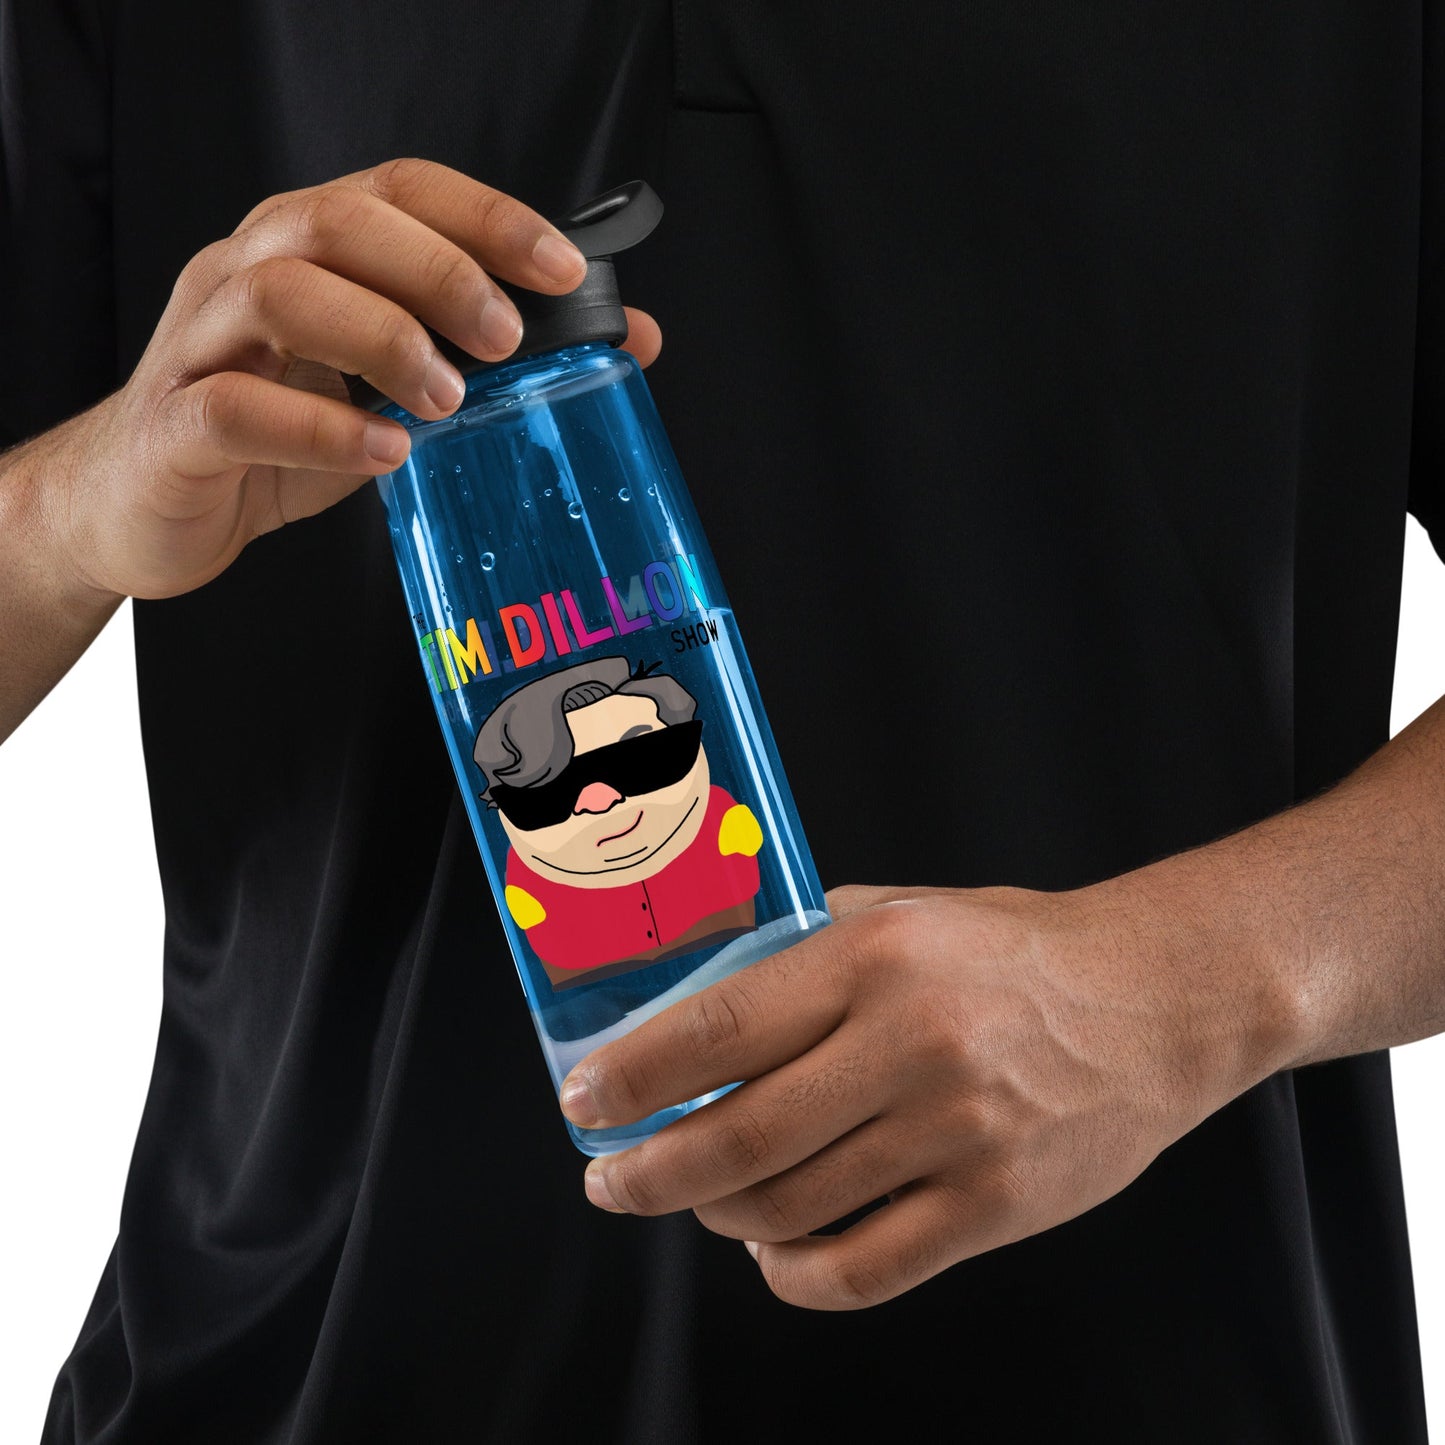 Tim Dillon Cartman, Southpark, The Tim Dillon Show, Tim Dillon Podcast, Tim Dillon Merch, Tim Dillon Sports water bottle Next Cult Brand Podcasts, Stand-up Comedy, Tim Dillon